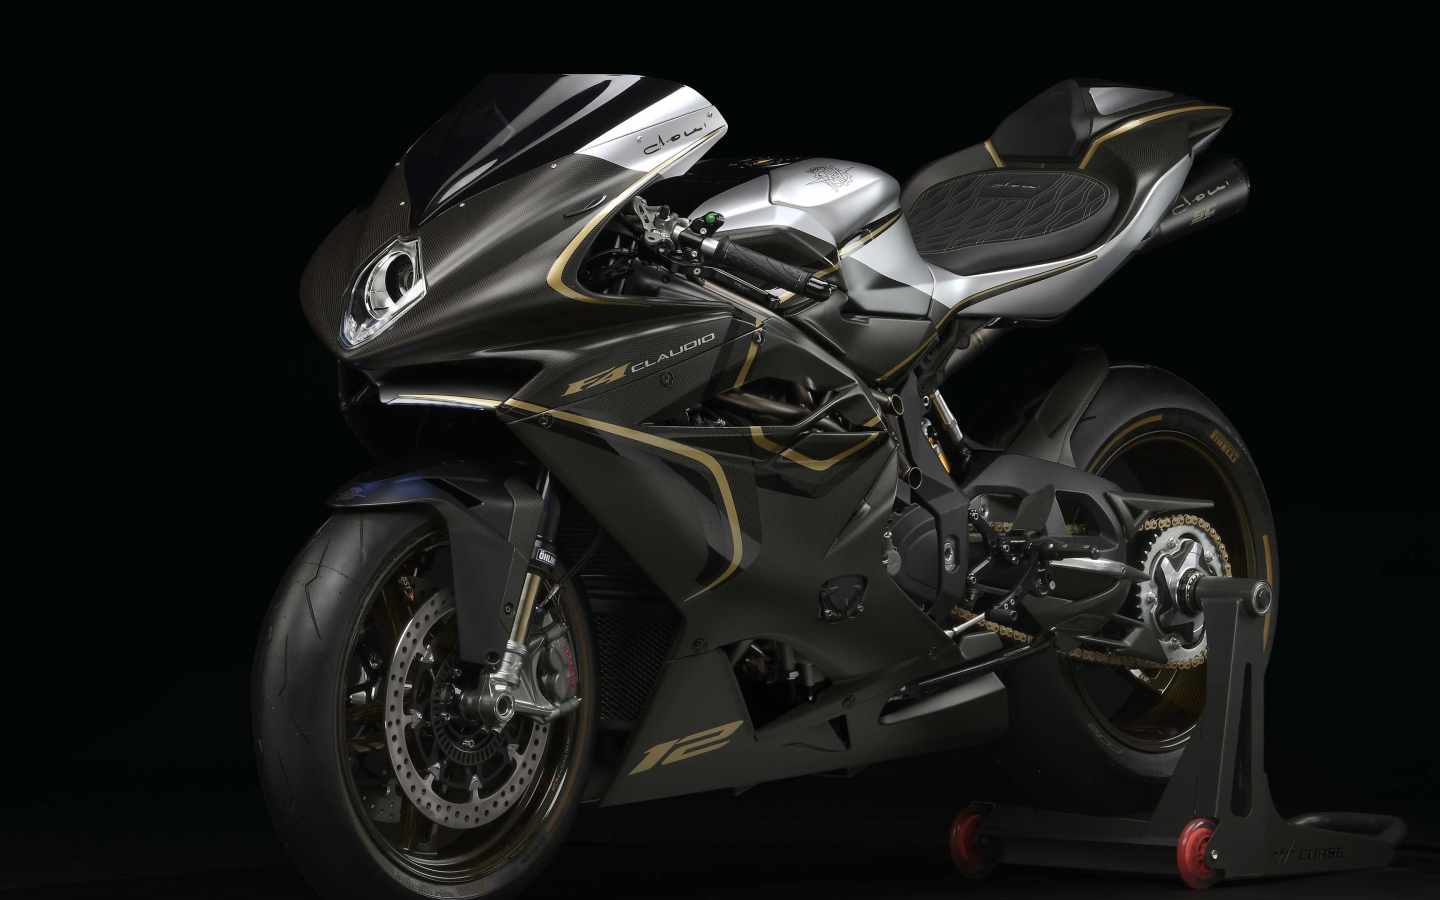 Motorcycle Agusta F4 Claudio 2018 on a black background